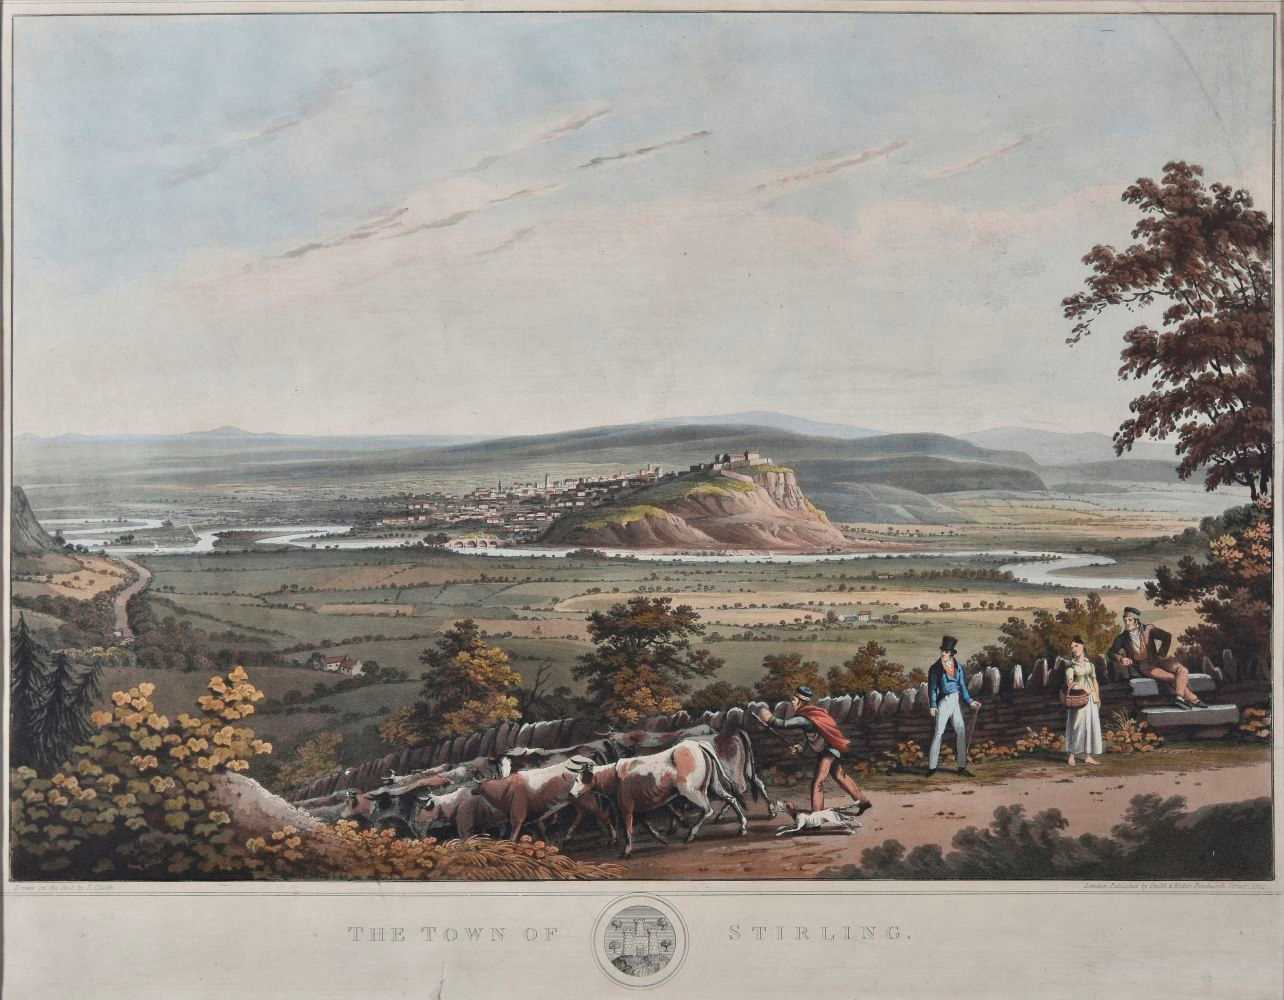 Lot 286 - Clark (John). The Town of Dunkeld [and] The Town of Sterling, 1824